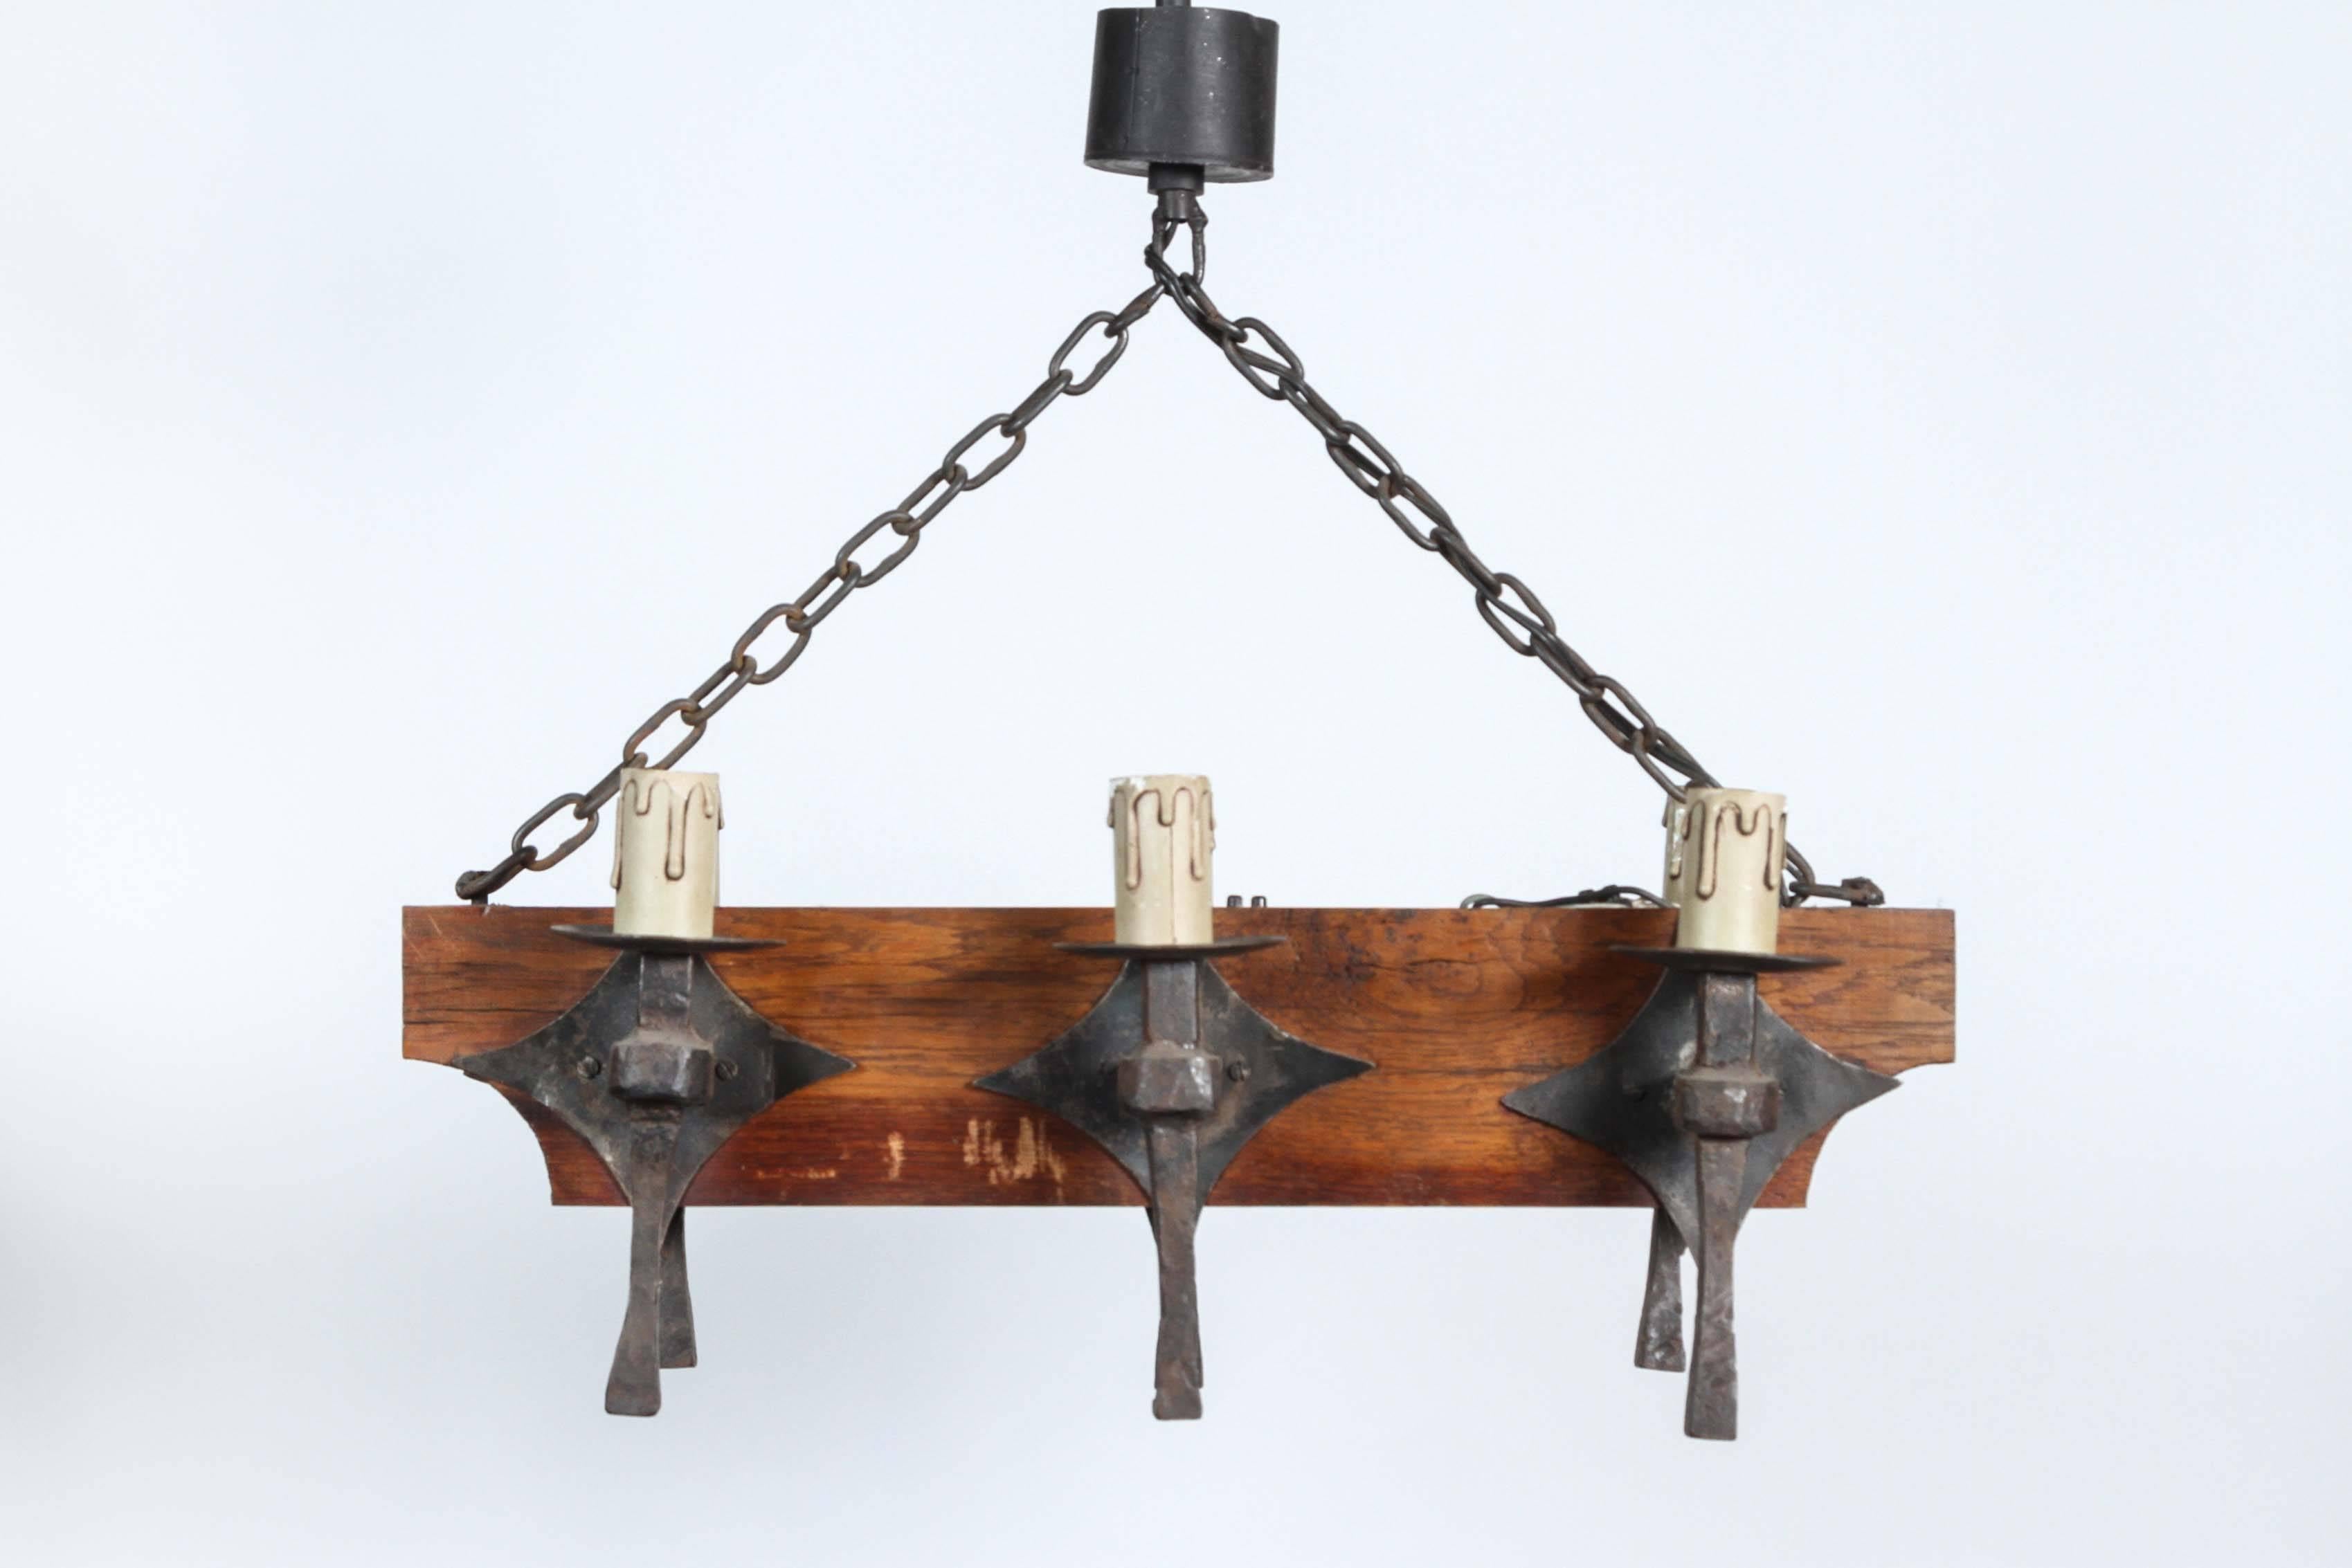 Six-light wrought iron and oak chandelier probably from Belgium or France, age unknown.